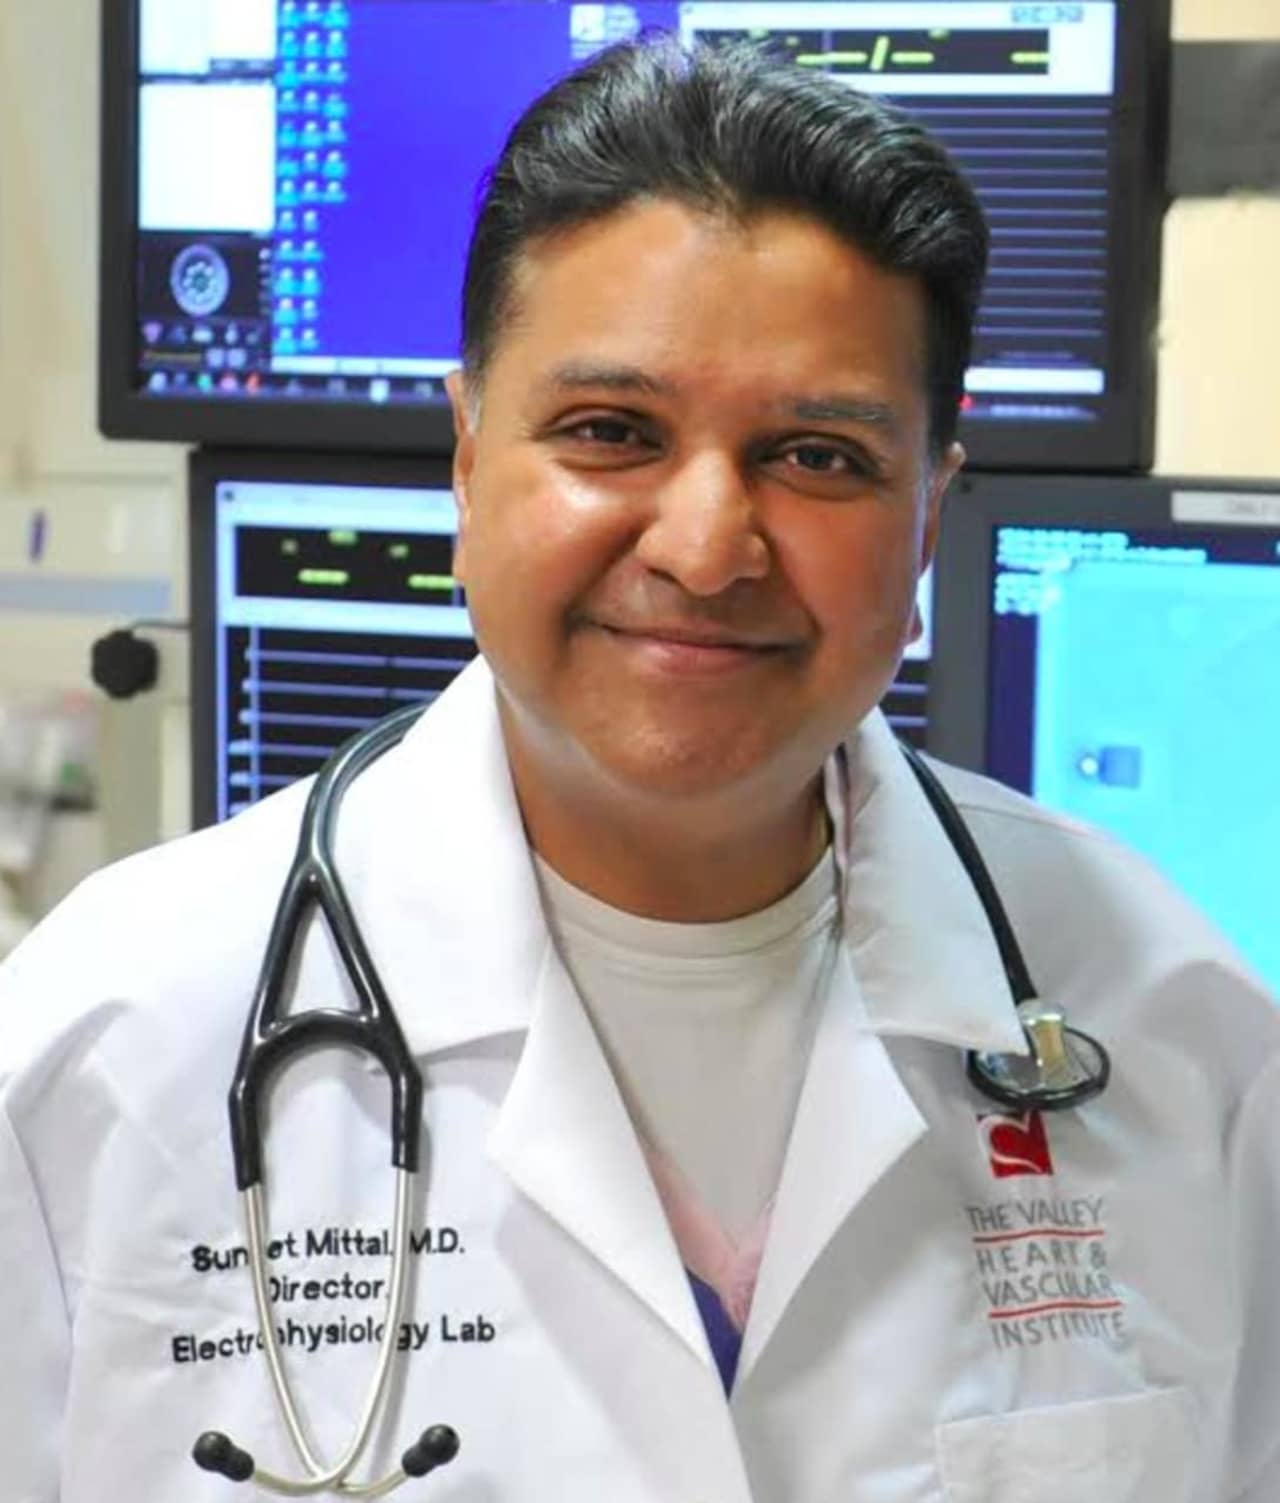 Dr. Suneet Mittal, of Valley Health System.